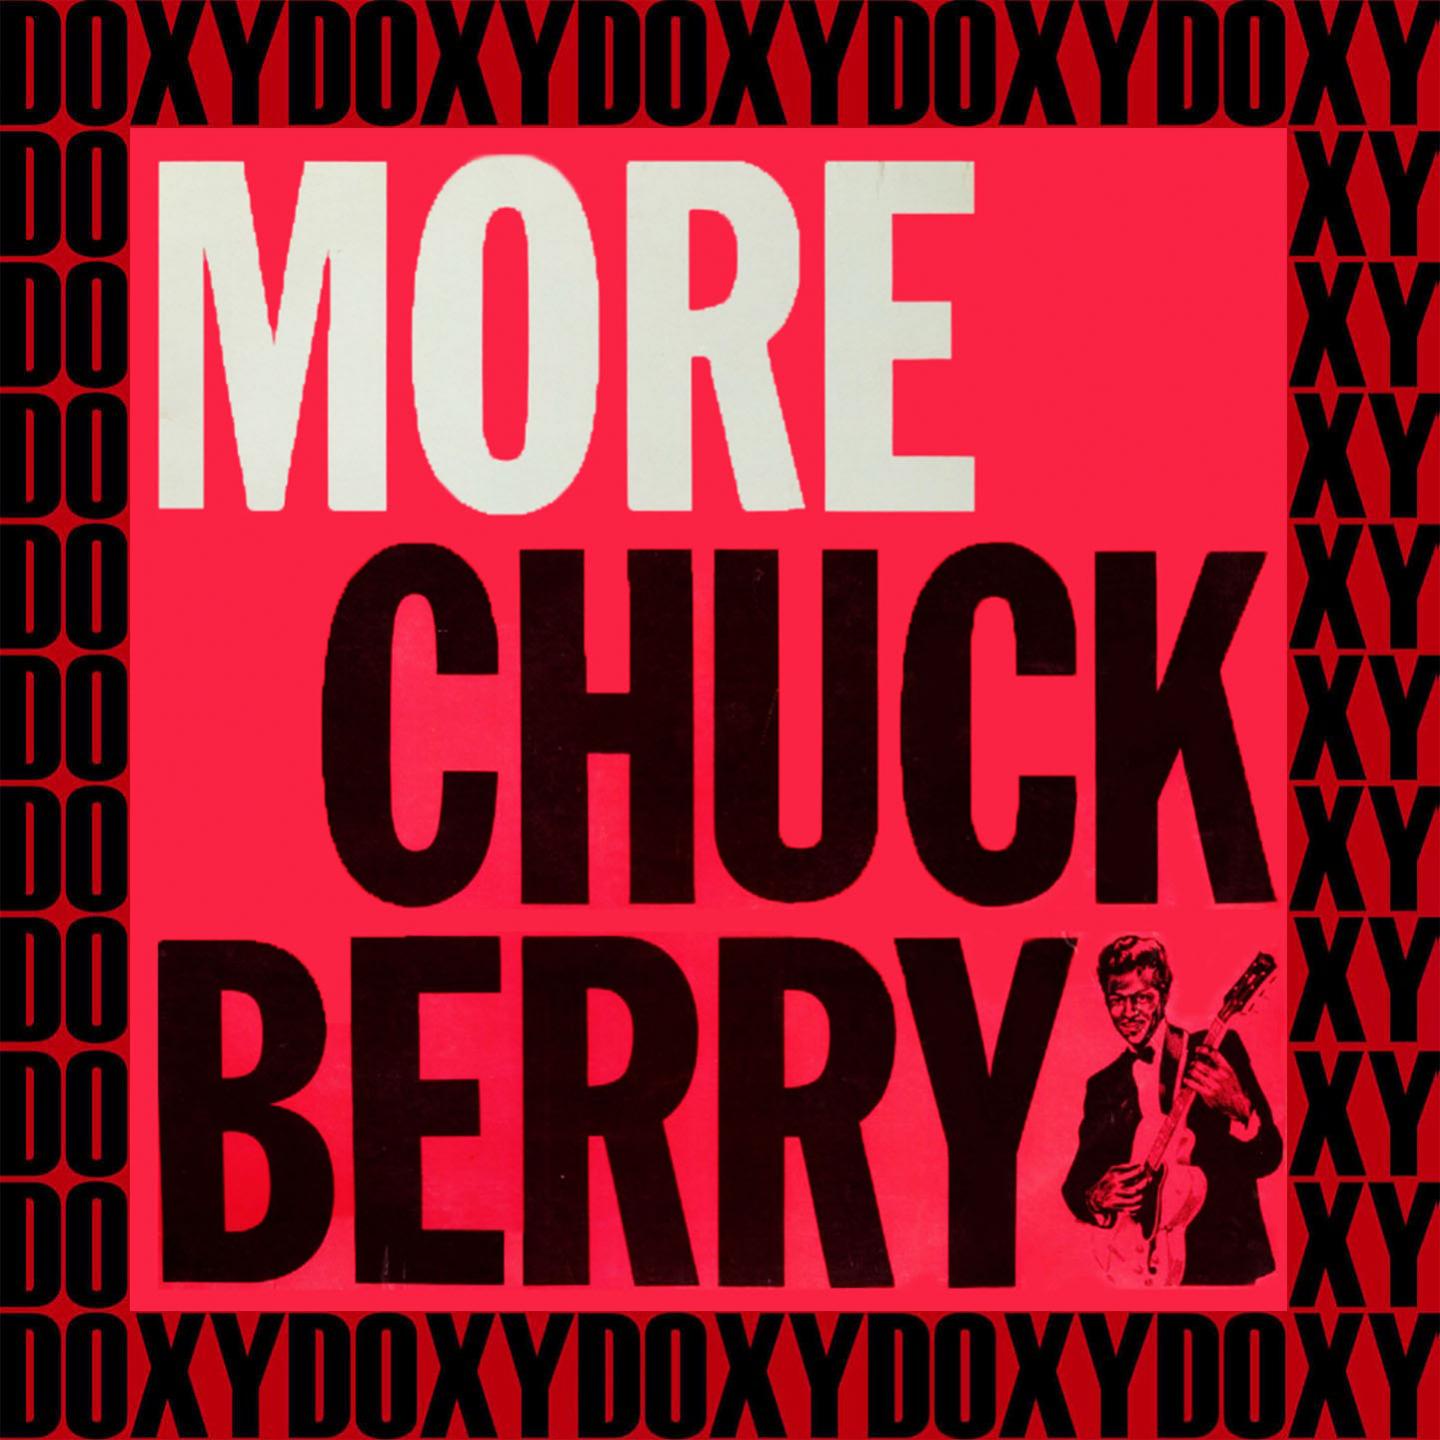 More Chuck Berry (Remastered Version) (Doxy Collection)